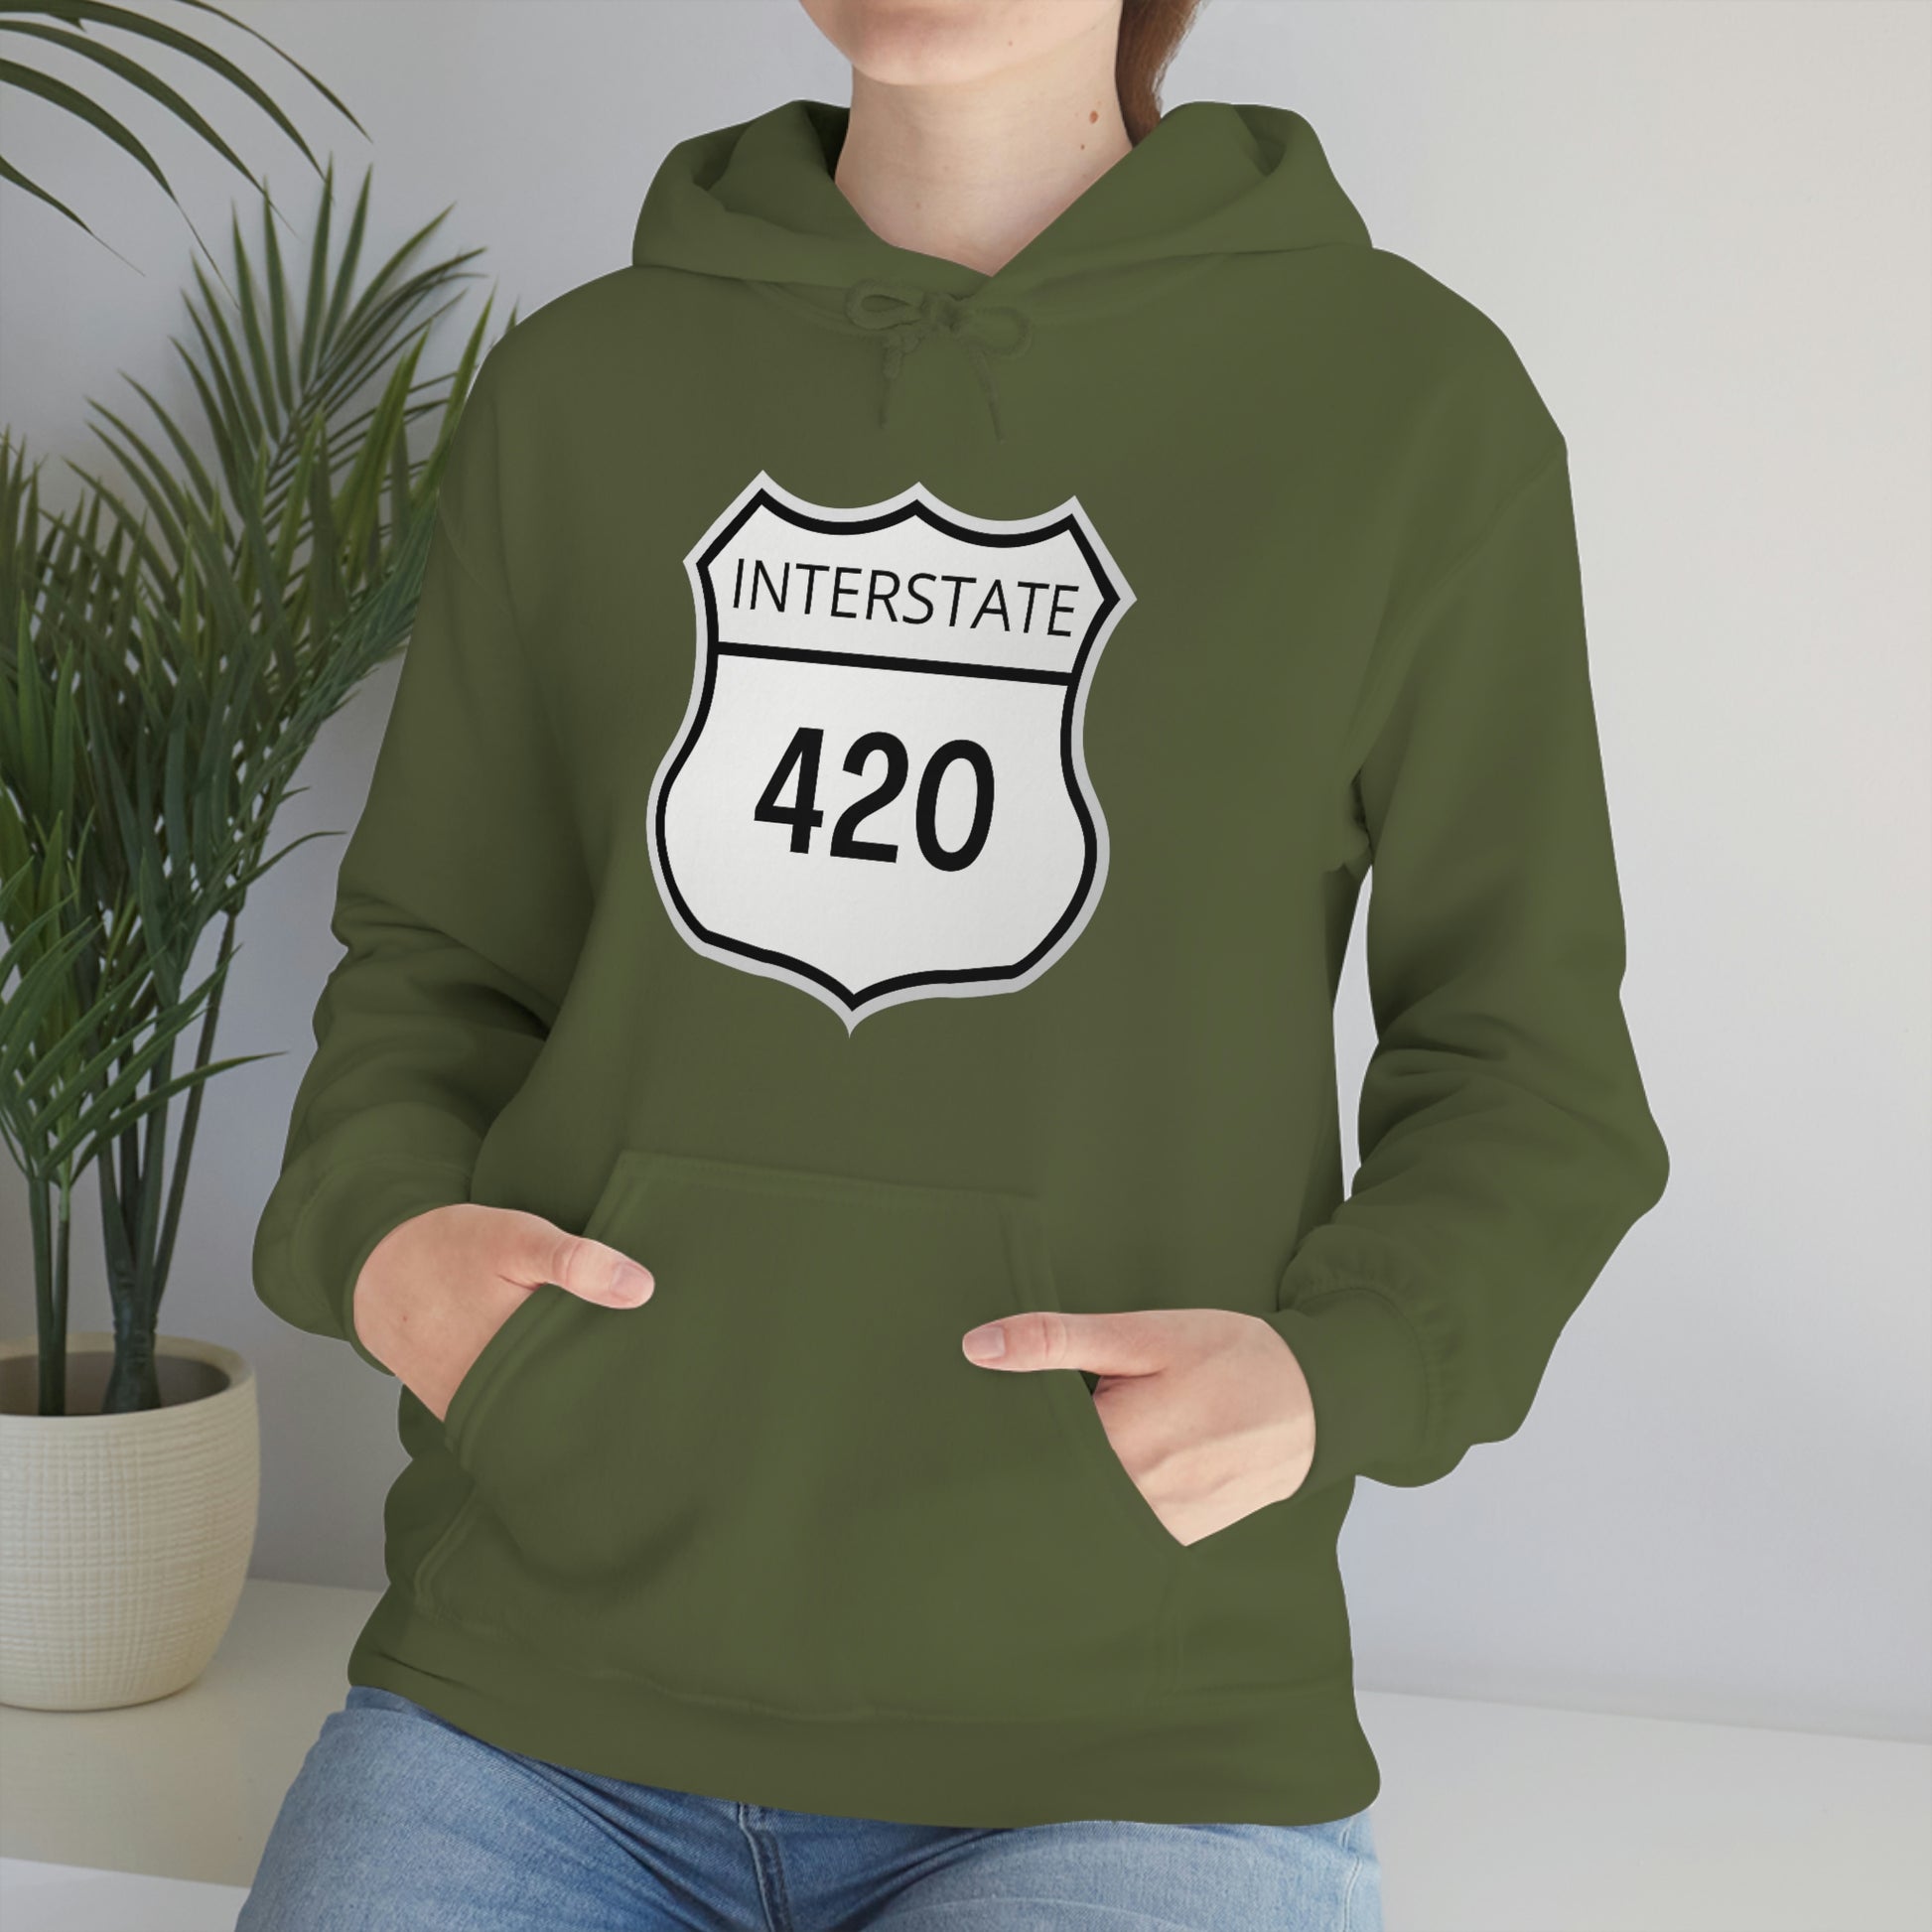 A woman wearing a forest green, Interstate 420, weed hoodie